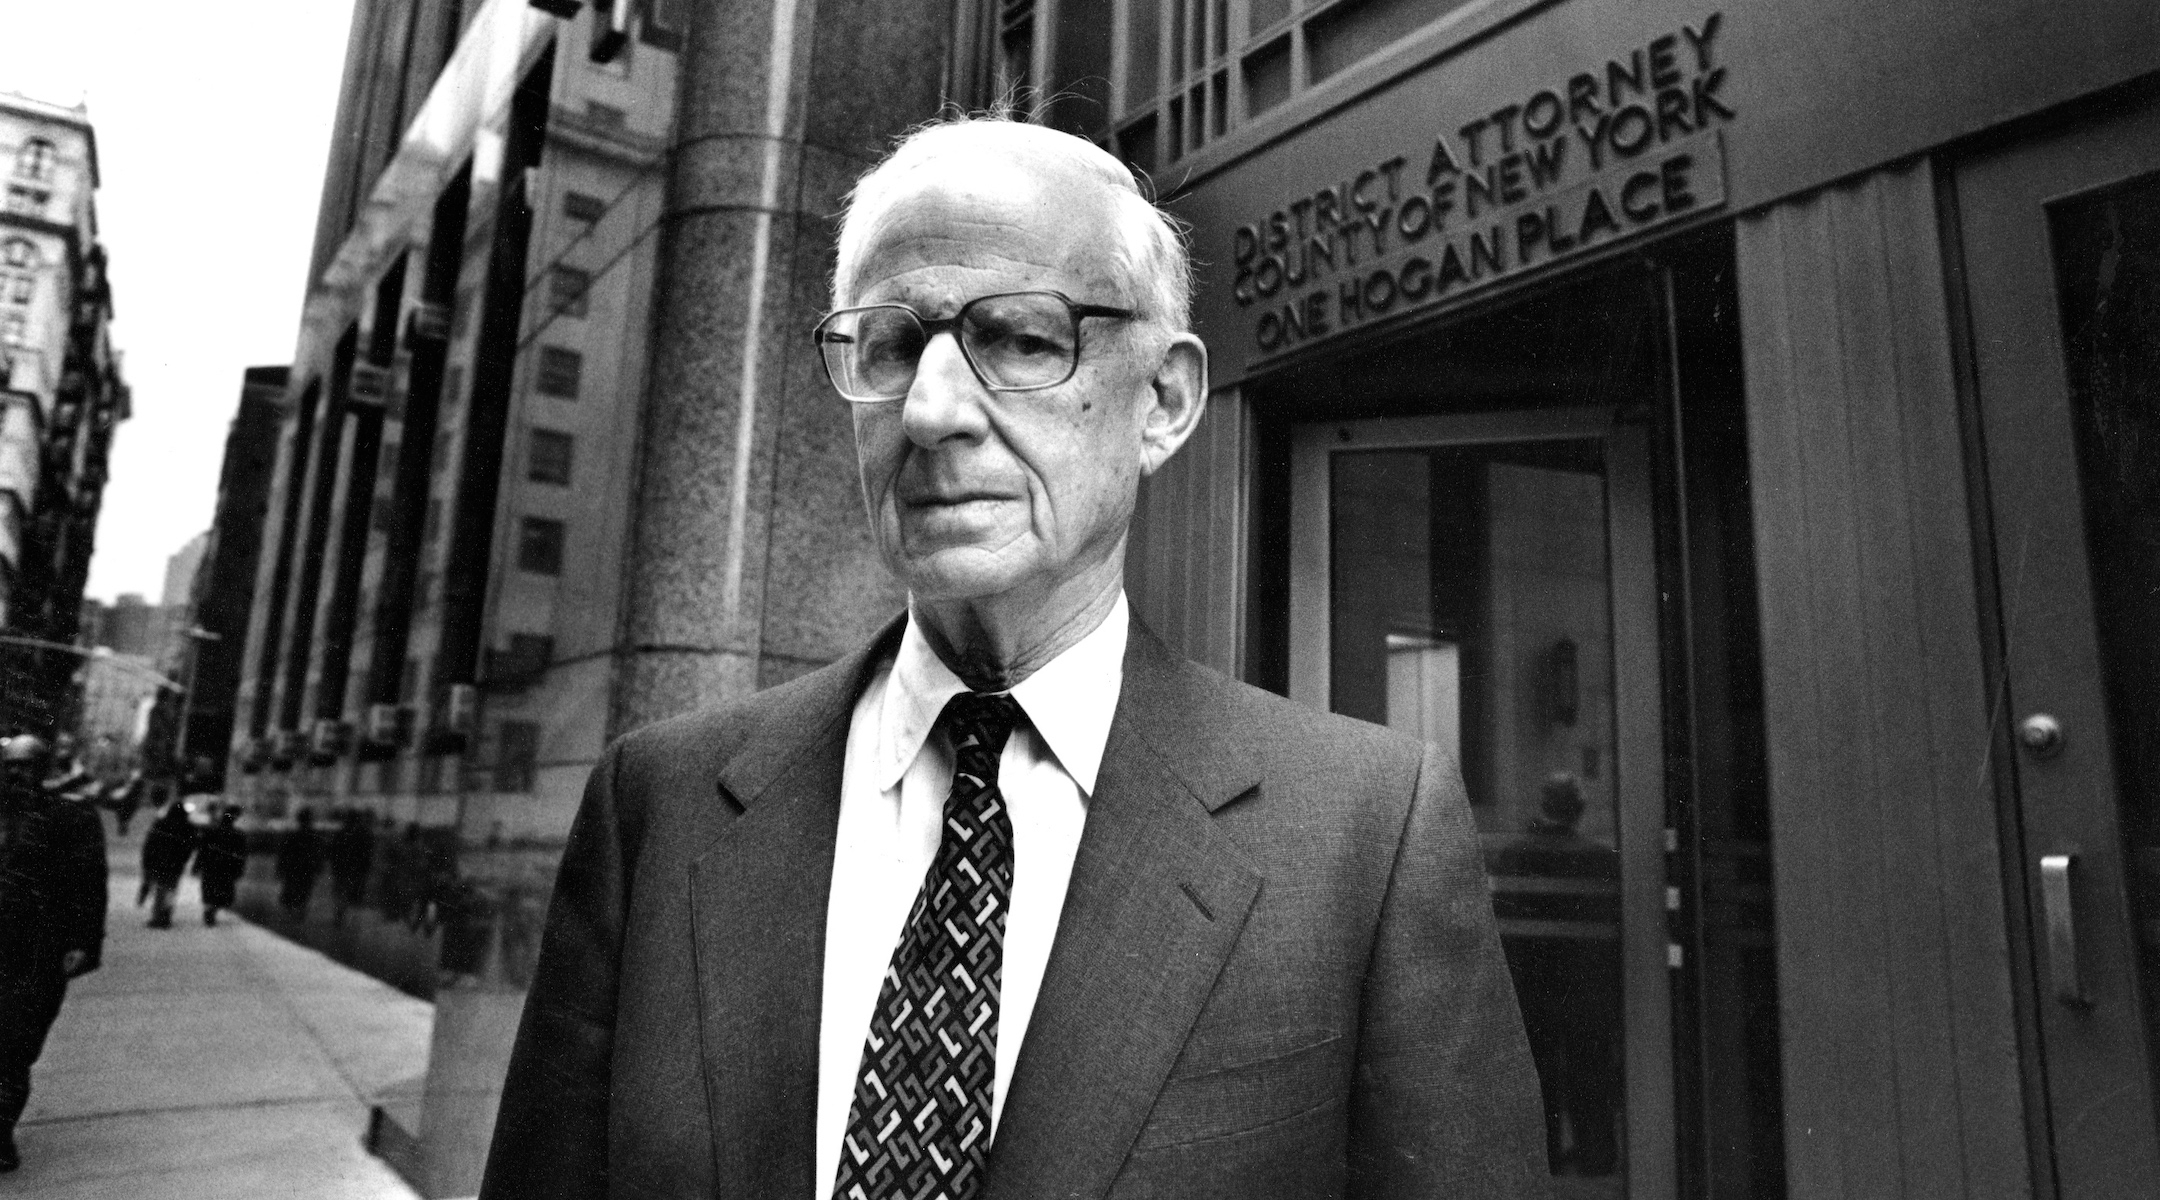 Robert M. Morgenthau, District Attorney of Manhattan, poses outside his office in New York City on March 9, 1993. (Helayne Seidman /Getty Images)